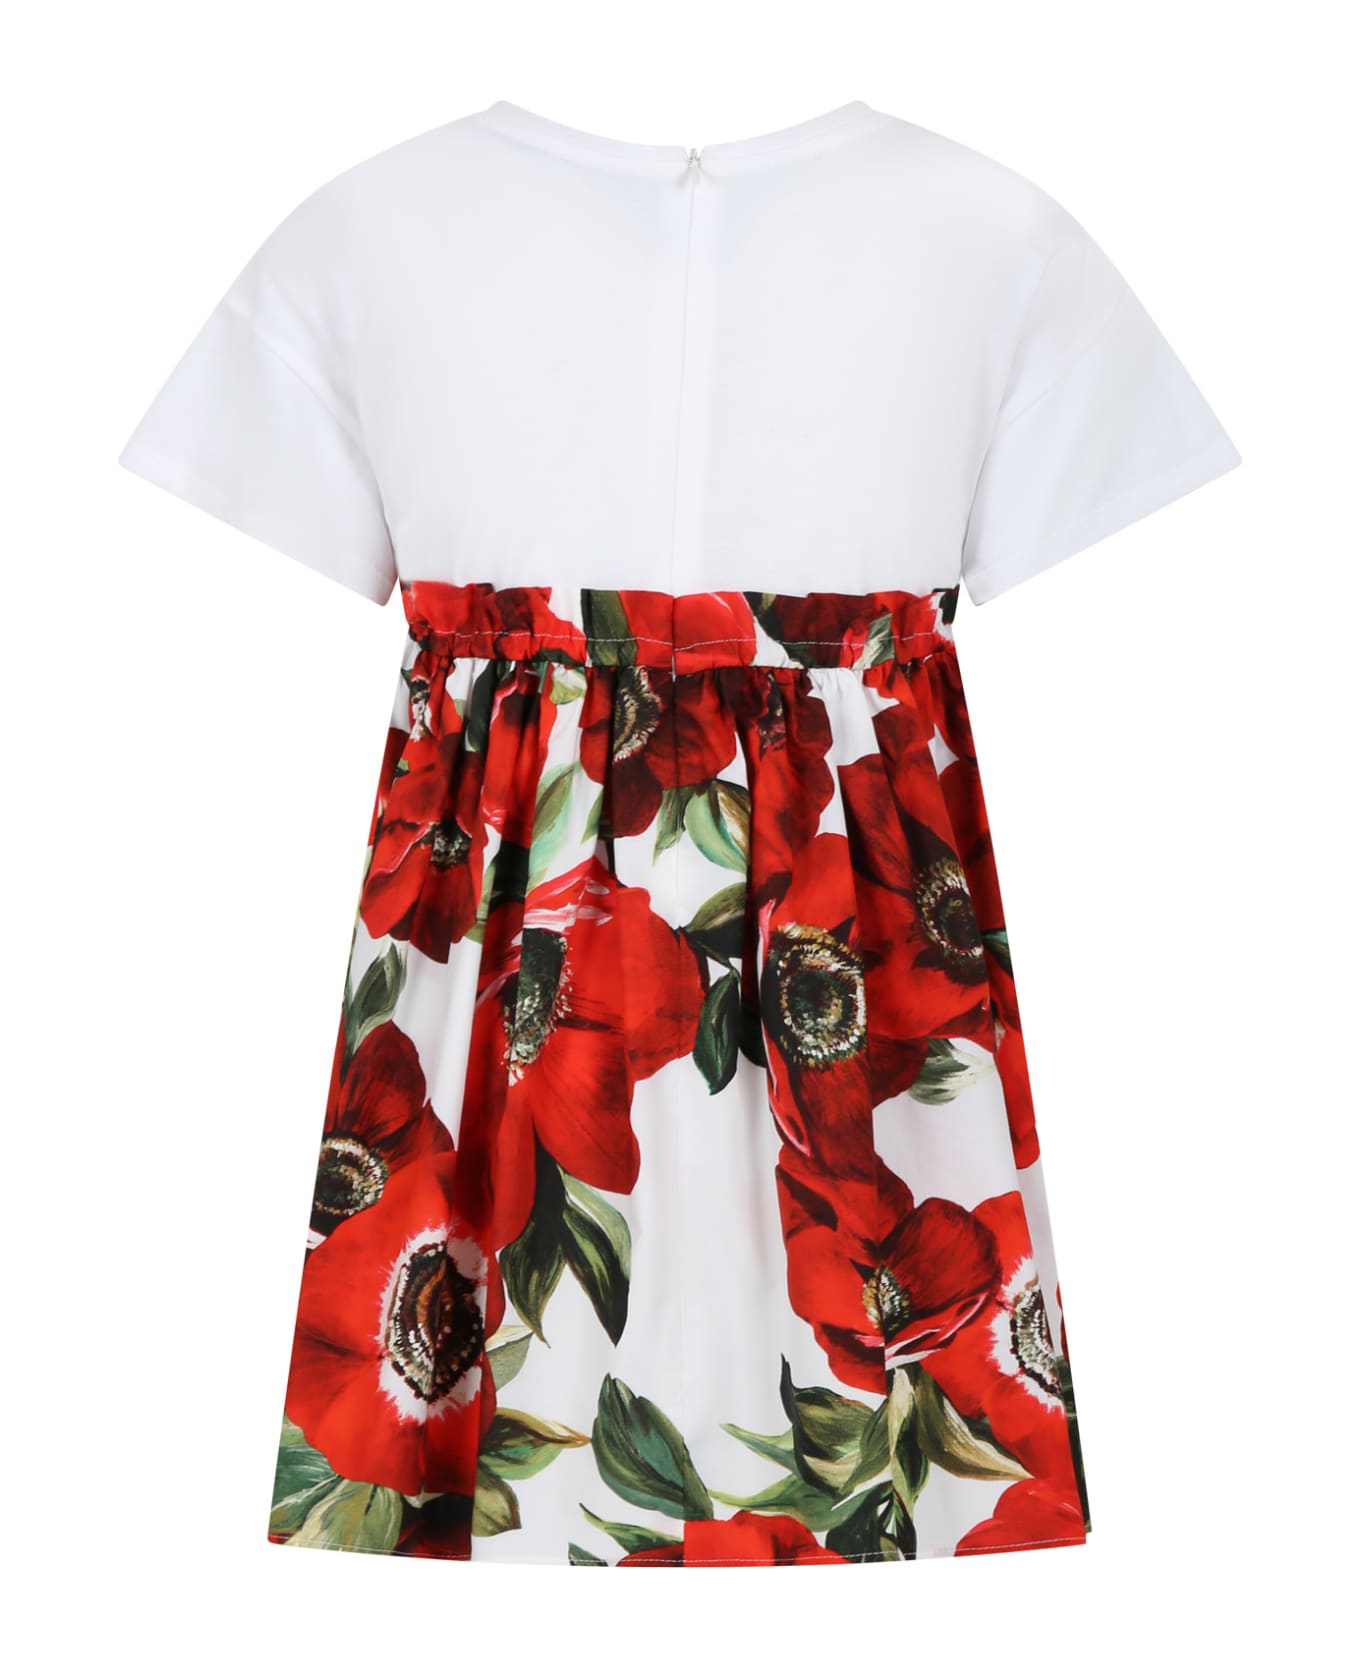 Dolce & Gabbana Casual White Dress For Girl With Poppies And Logo - White ワンピース＆ドレス